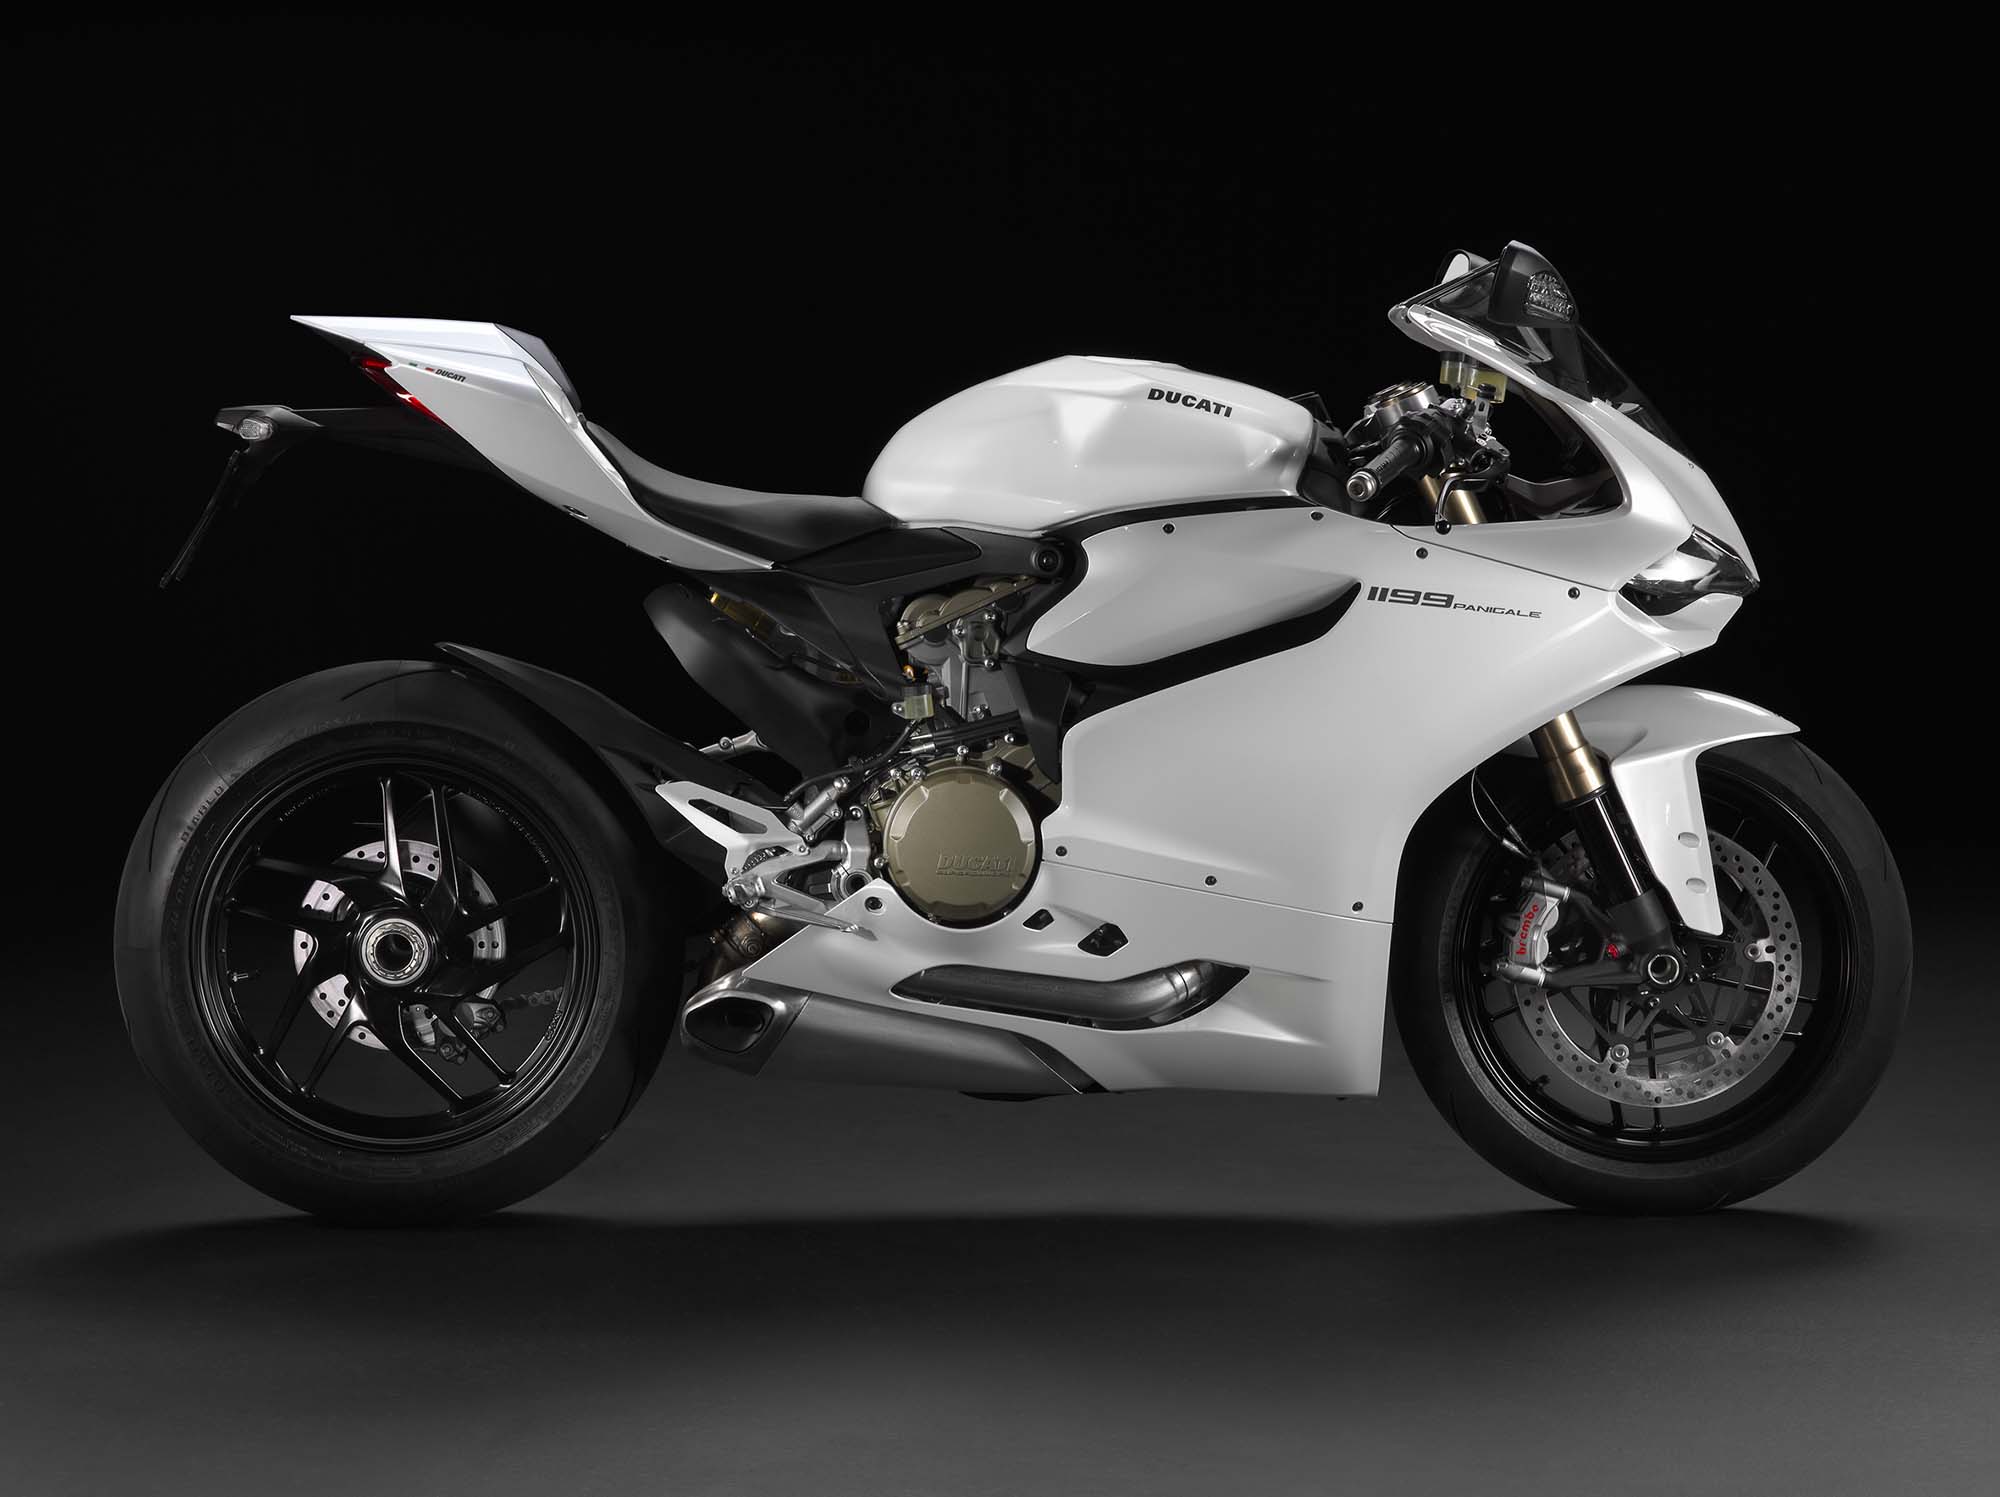 2013 Ducati 1199 Panigale  Now in Arctic White  Asphalt amp; Rubber